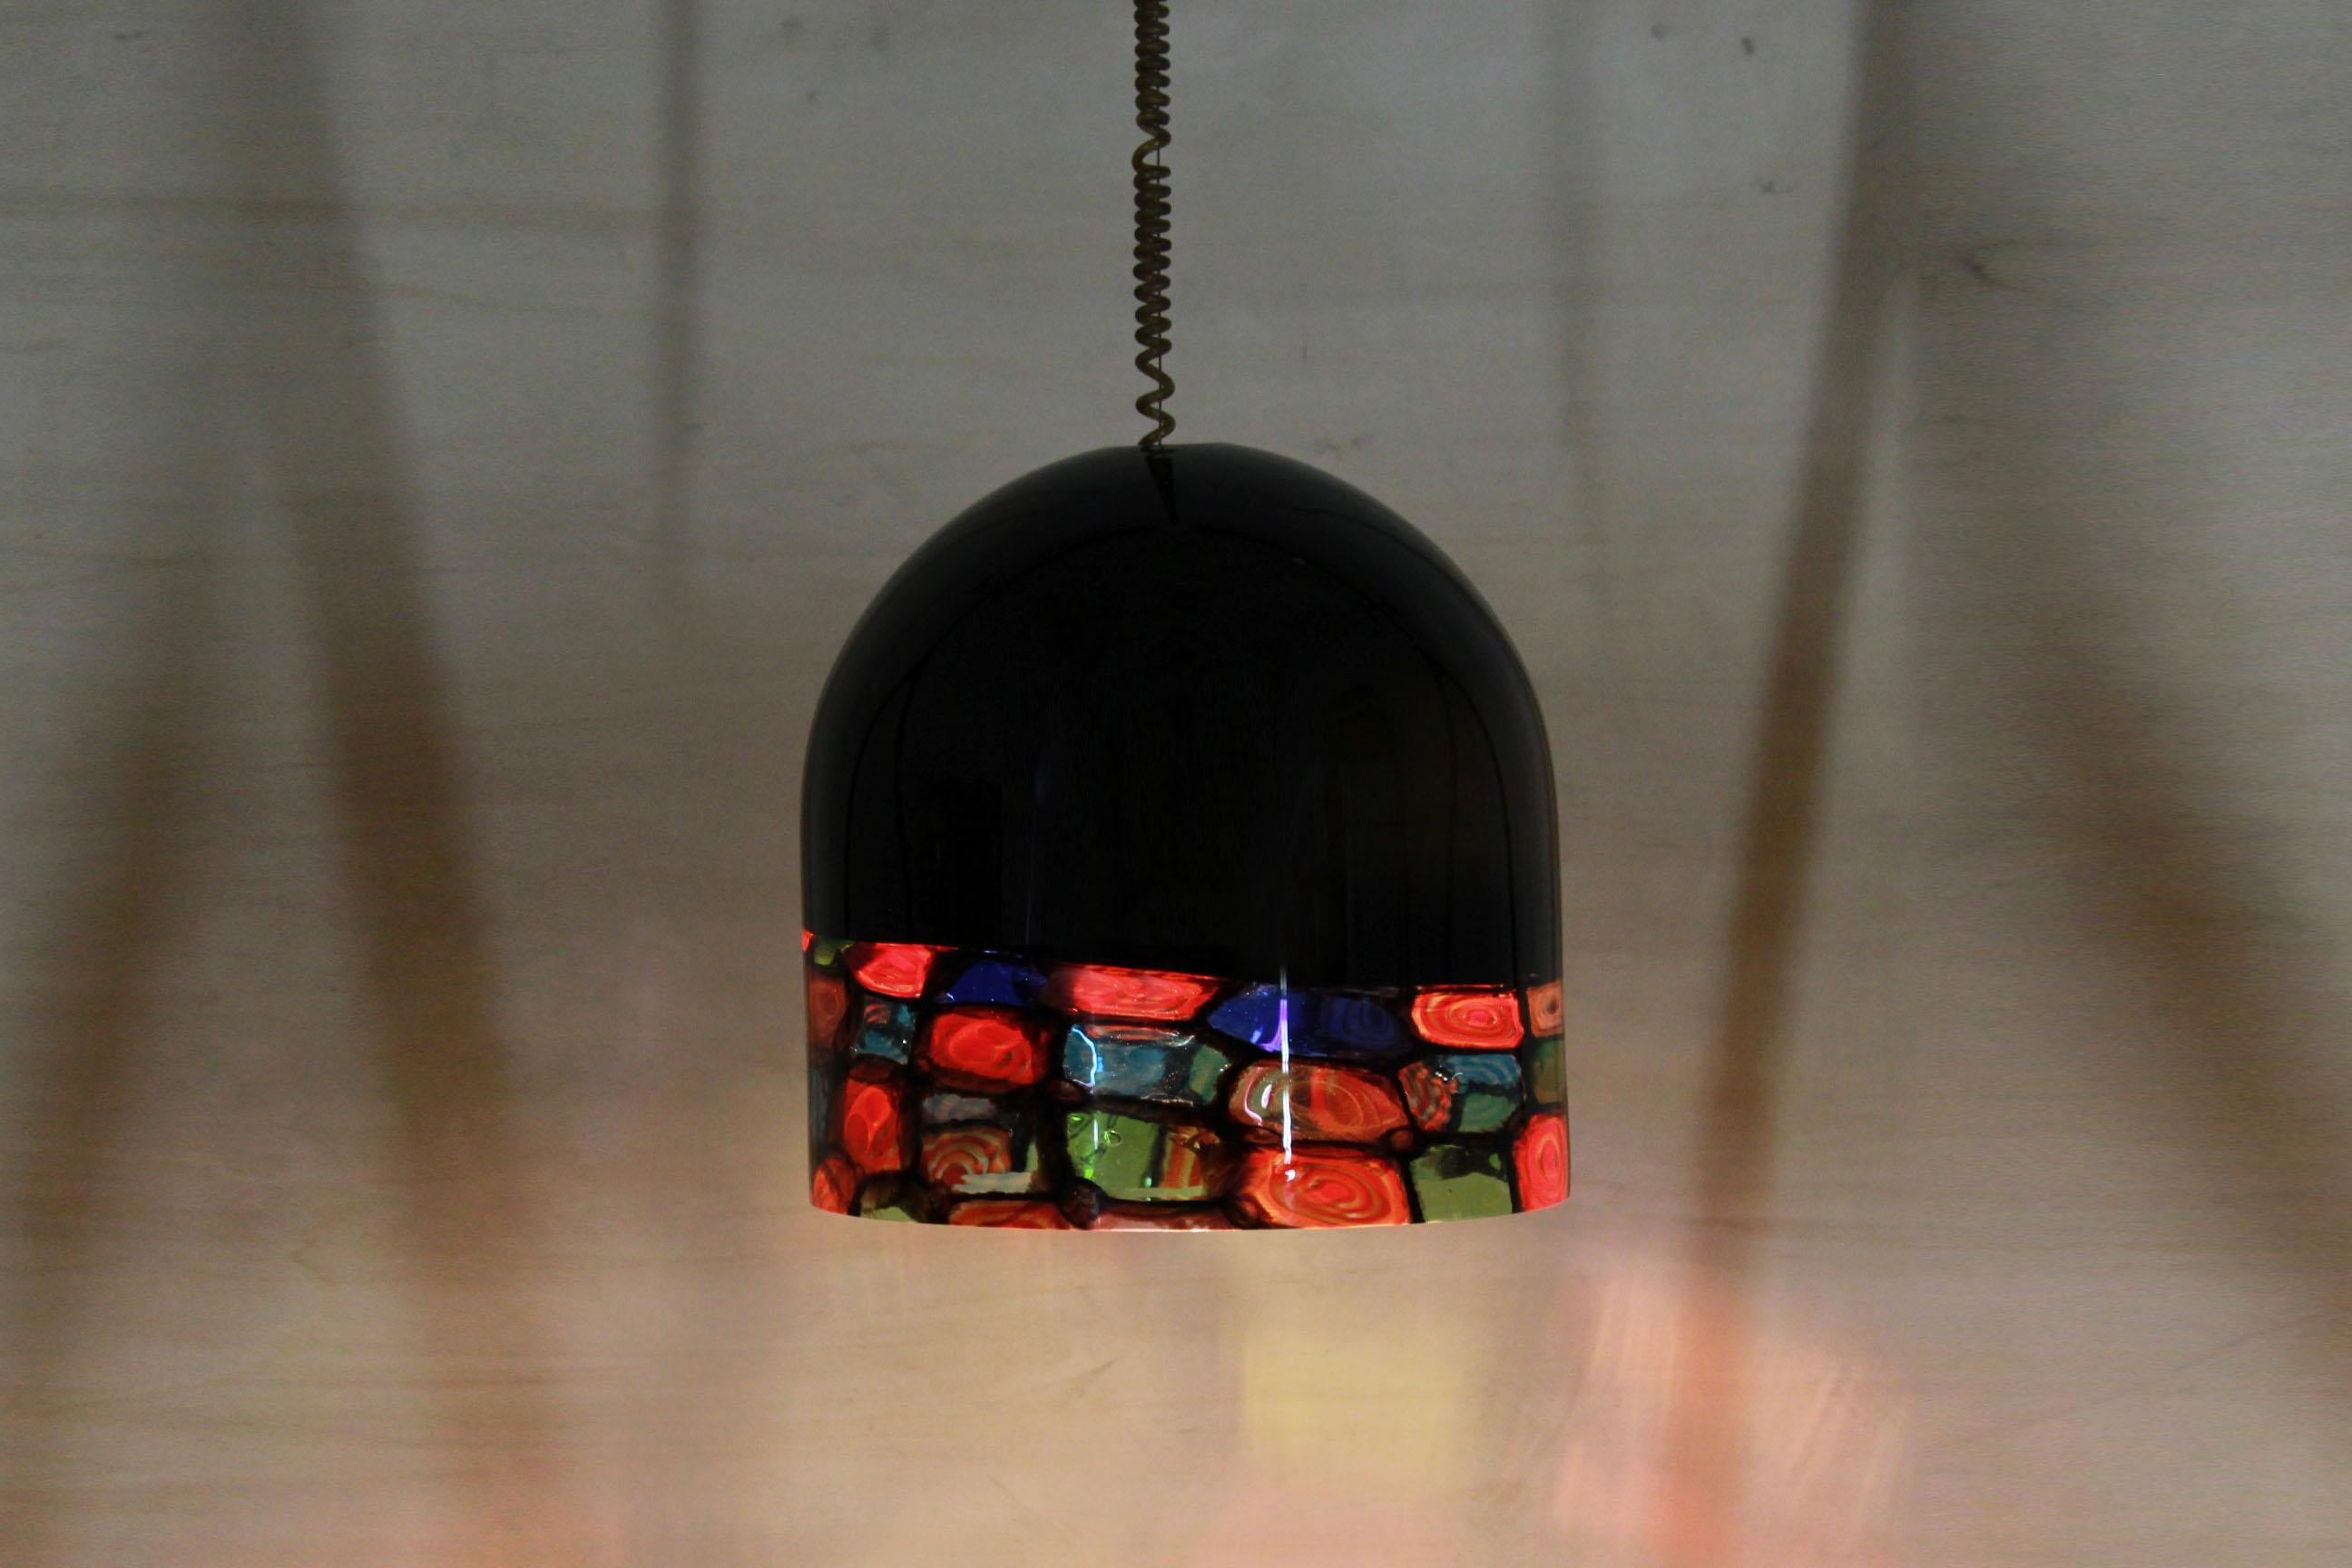 Multi-color Murano glass lampshade from the 1970s. Designed by Noti Massari for Leucos. The lamp is suspended from its ceiling cap by a single steel cable, surrounded by a coiled electrical cable (which is adjustable for hanging). In excellent